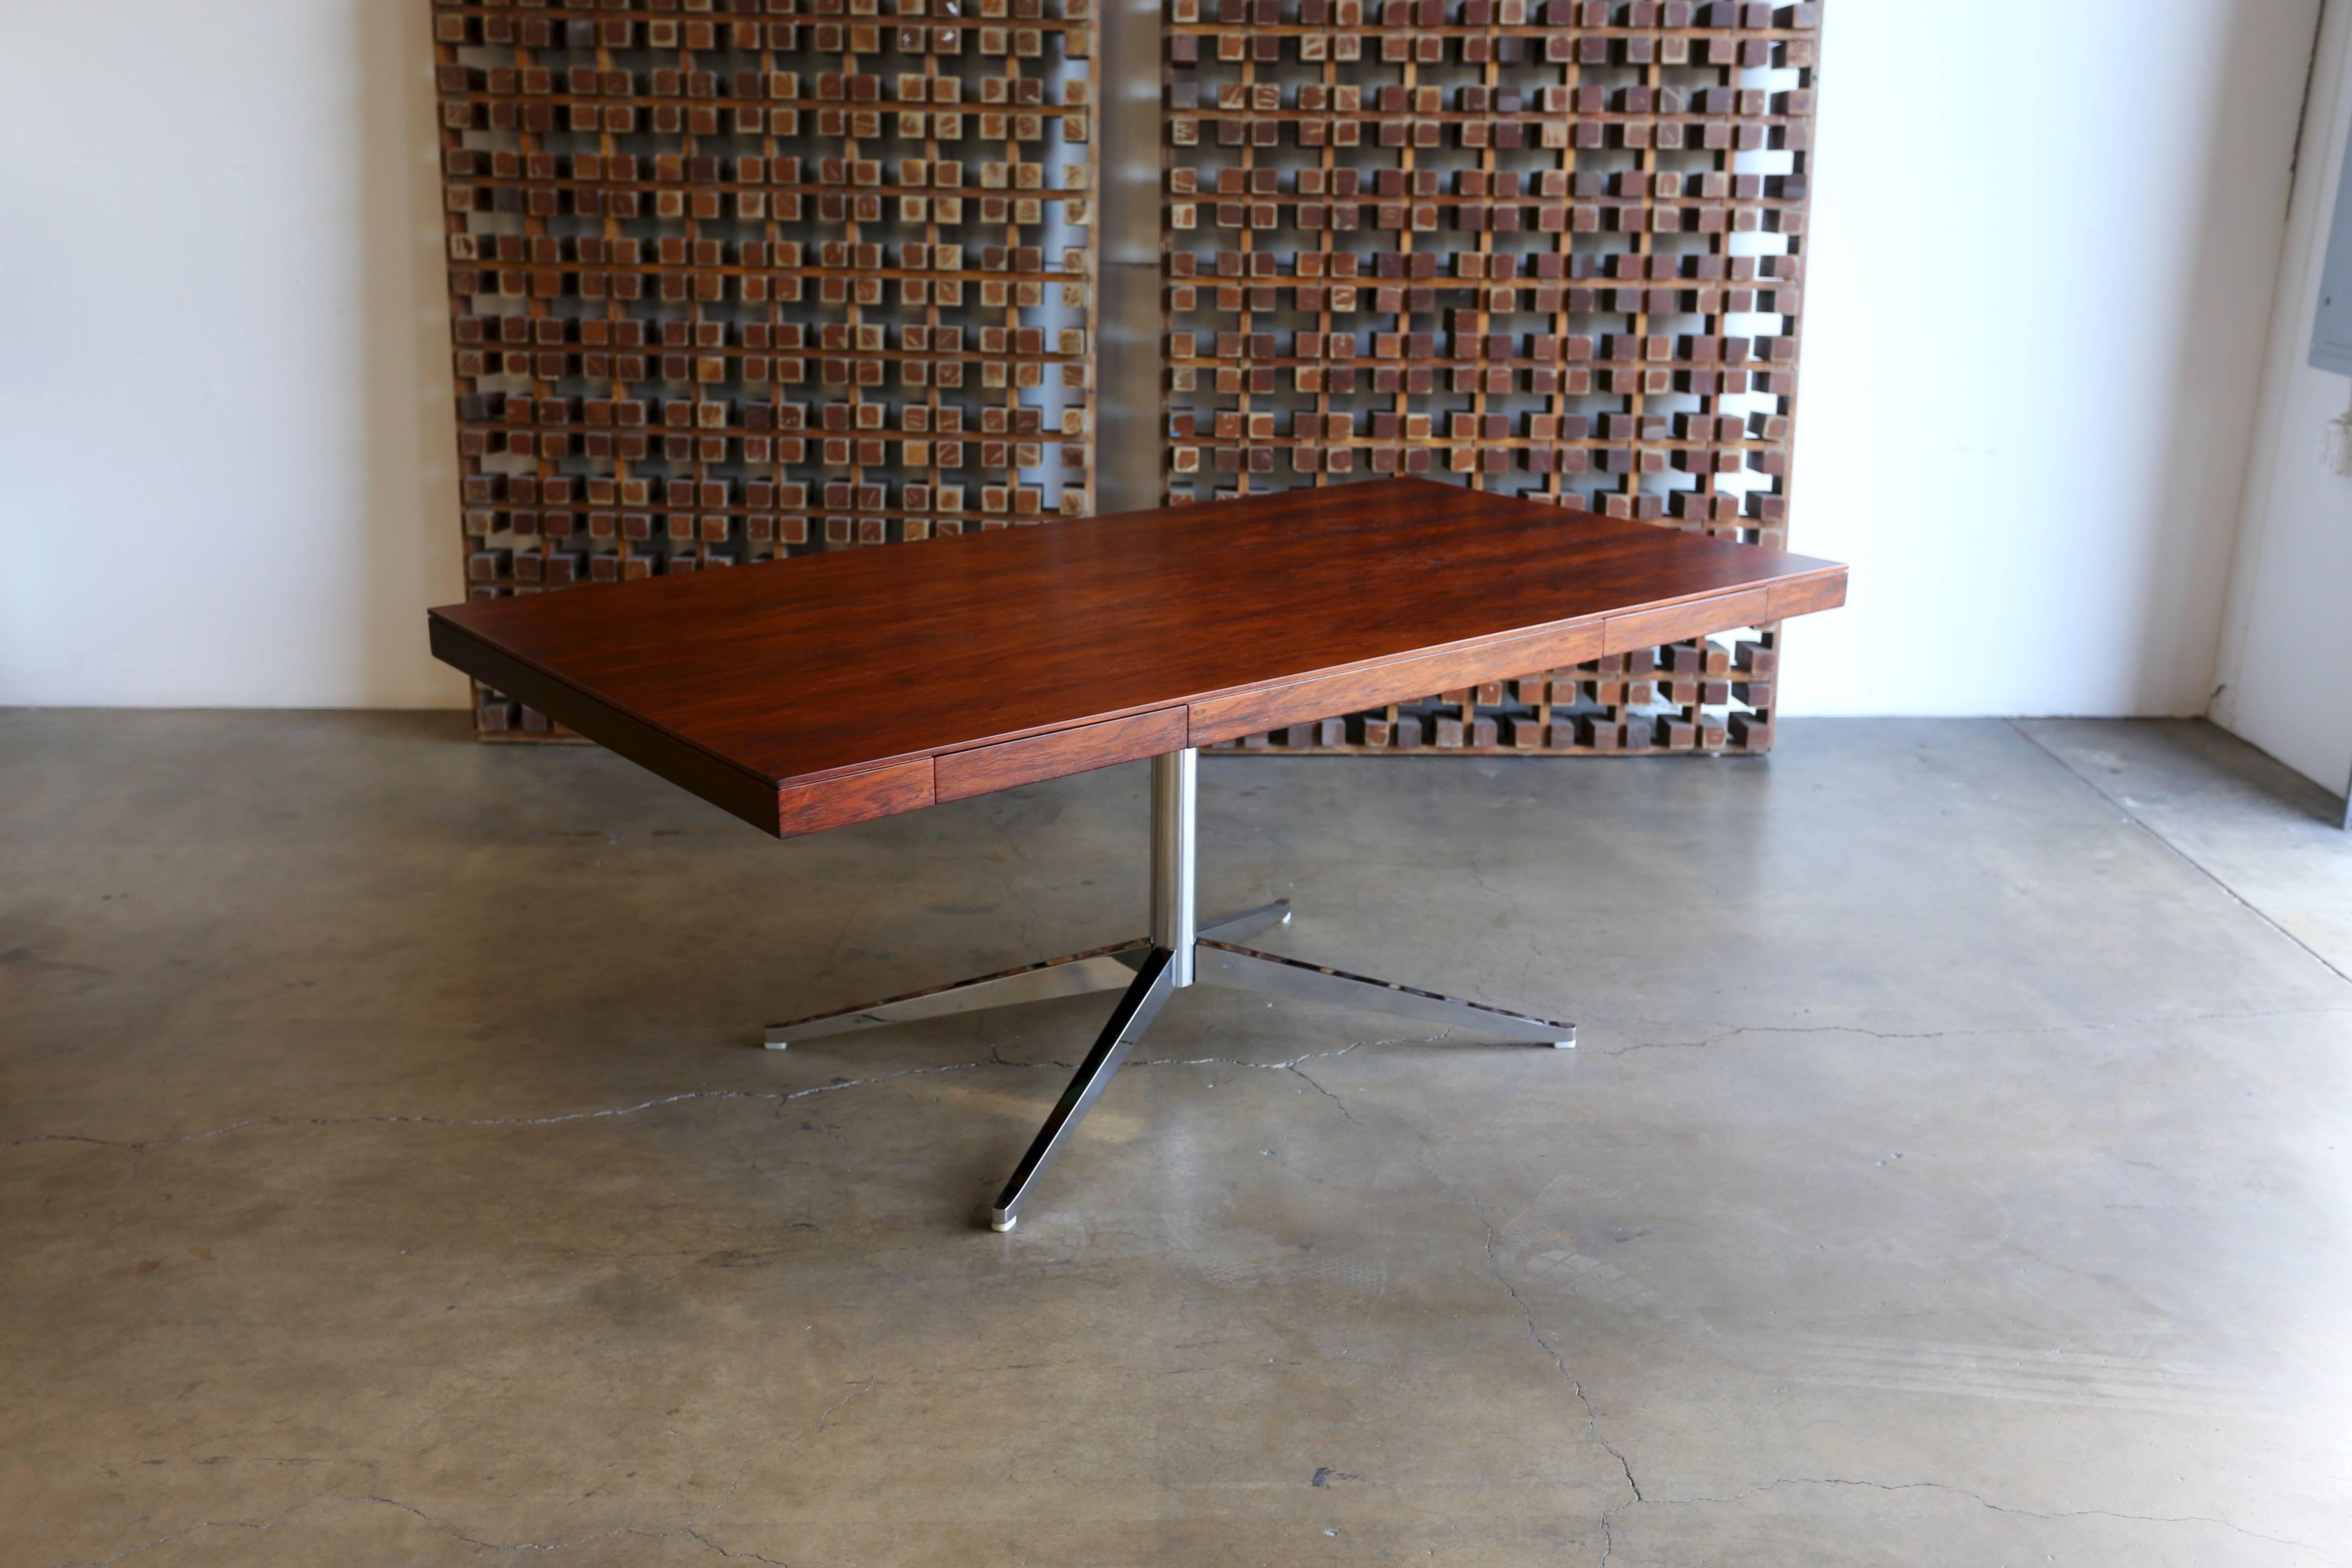 Rosewood executive partners desk by Florence Knoll. Manufactured by Knoll. Highly figured rosewood grain with a mirror polished nickel-plated base. Drawers on both sides. This piece has been professionally restored.